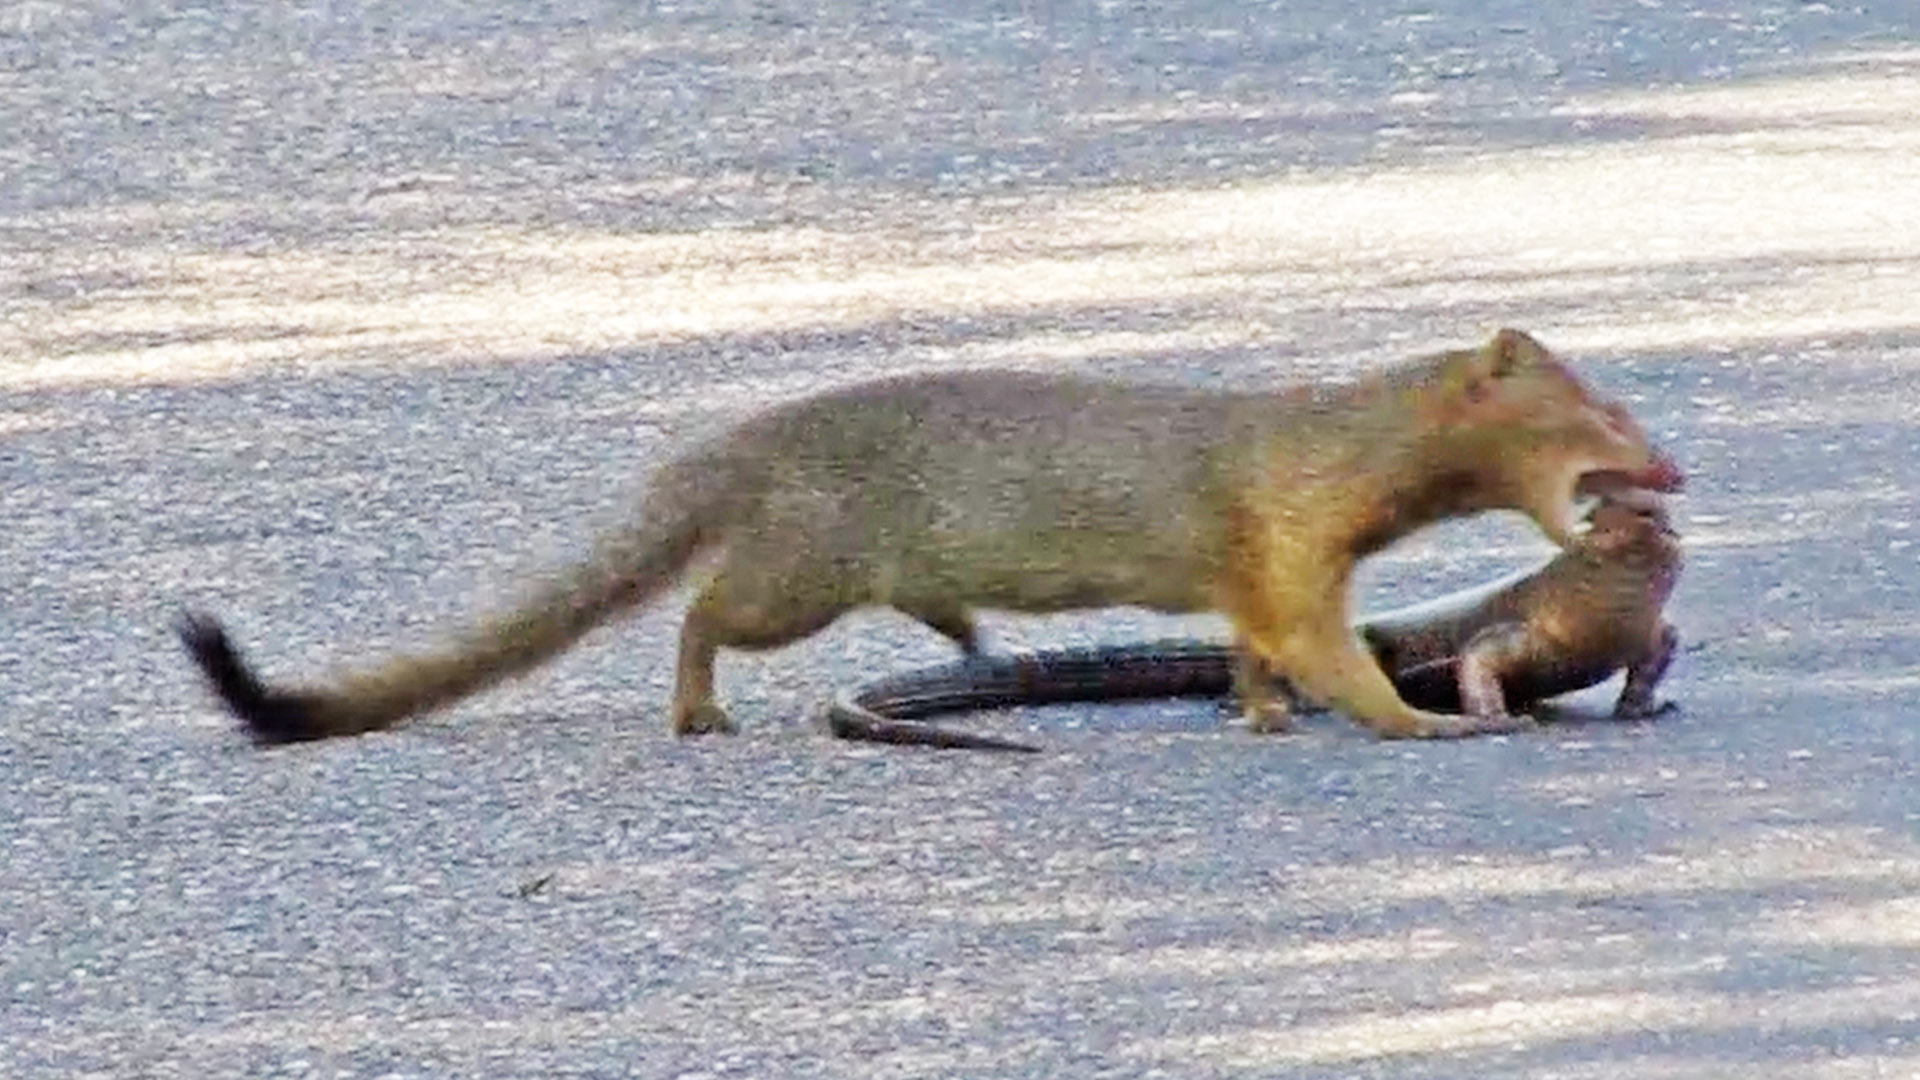 Mongoose Rips out Lizard’s Eyes